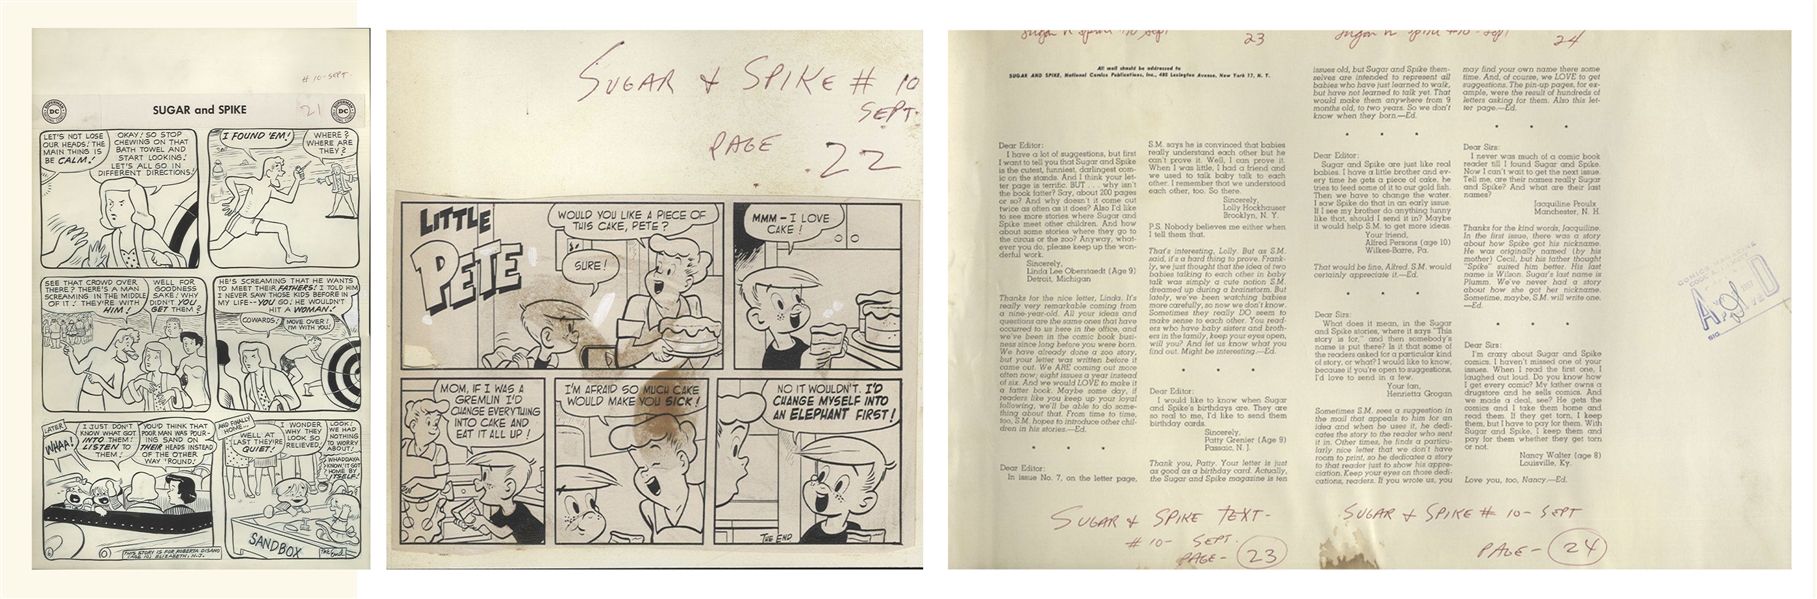 Sheldon Mayer Original Hand-Drawn ''Sugar and Spike'' Comic Book -- Complete Issue of 24 Pages From the September 1957 Issue #10 -- Sugar and Spike Try to Figure Out the Telephone & More Adventures